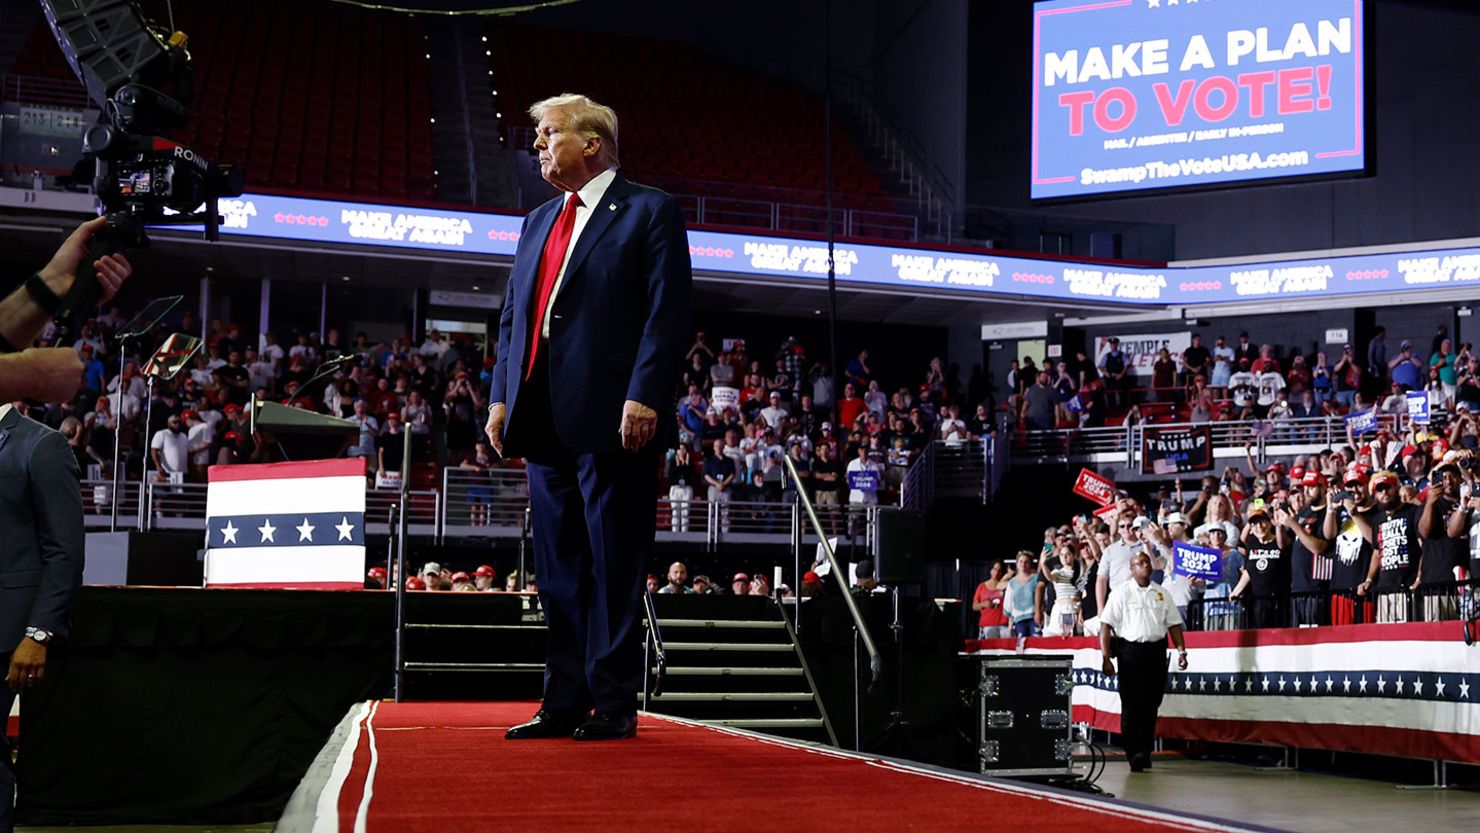 Former President Donald Trump walks offstage after speaking at a campaign rally at the Liacouras Center on June 22 in Philadelphia.